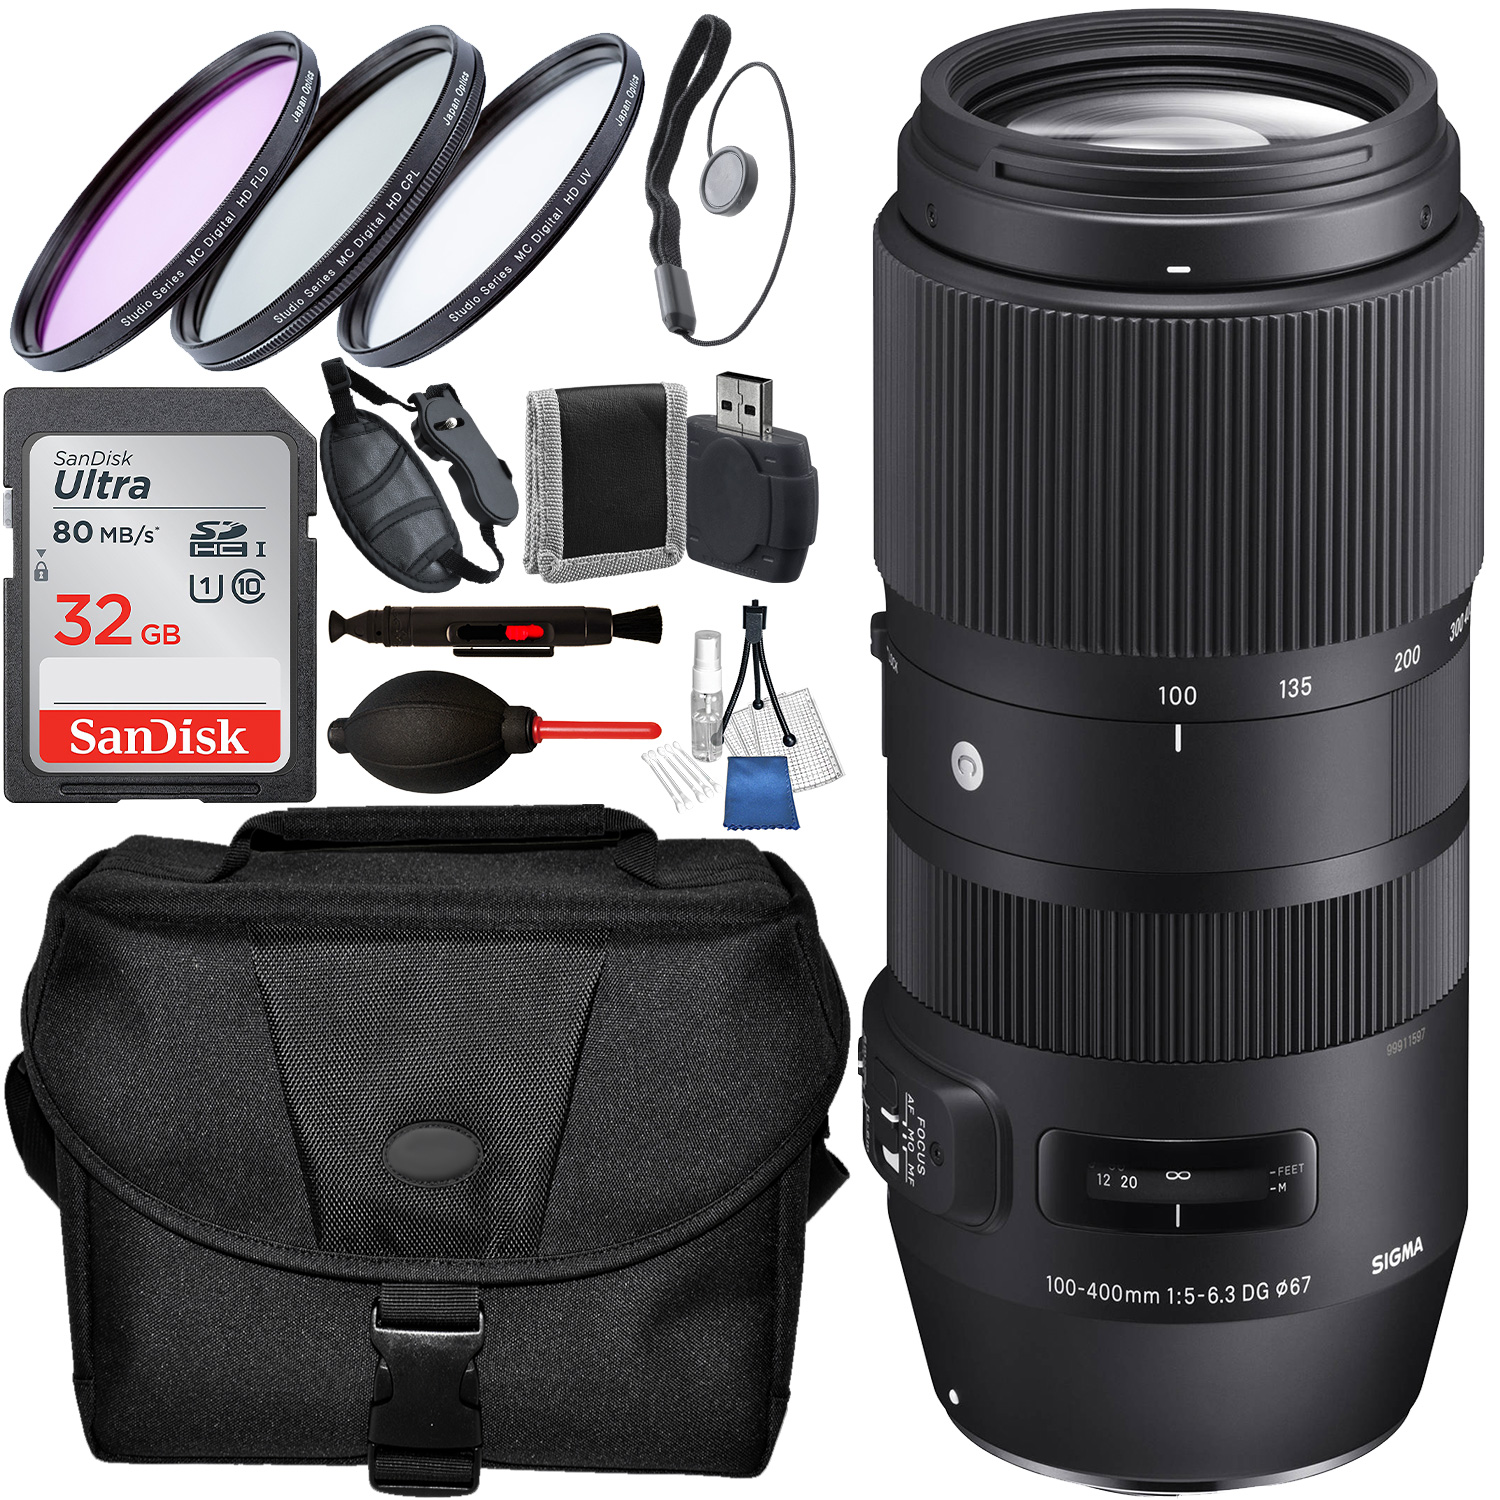 Sigma 100-400mm f/5-6.3 DG OS HSM Contemporary Lens for Nikon F and Accessory Bundle